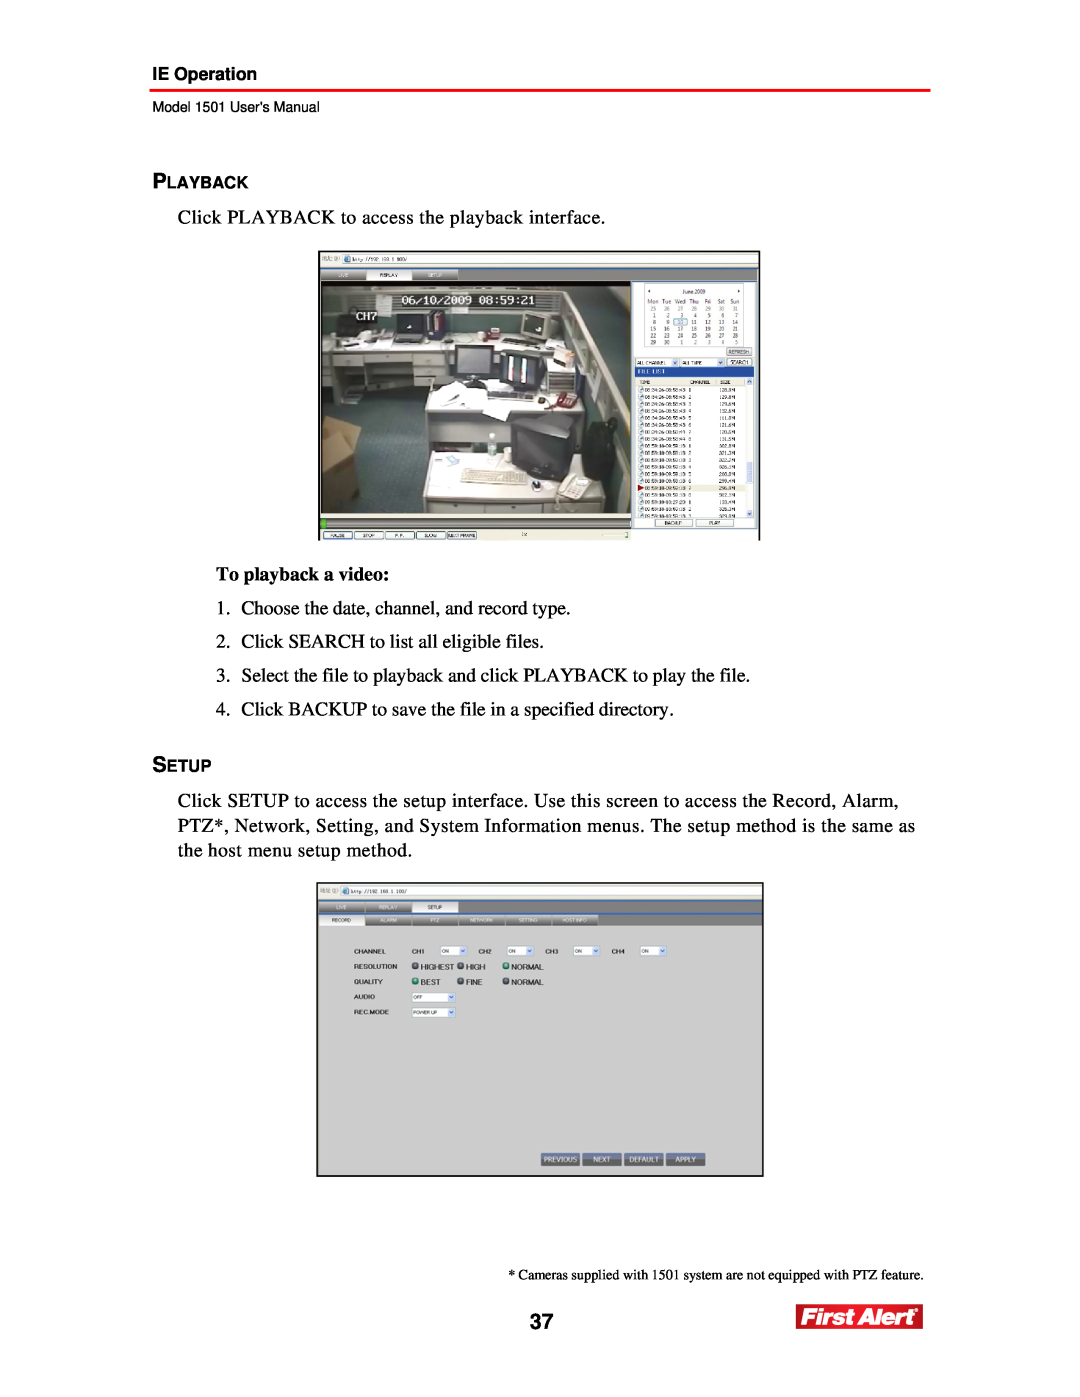 First Alert 1501 user manual To playback a video 